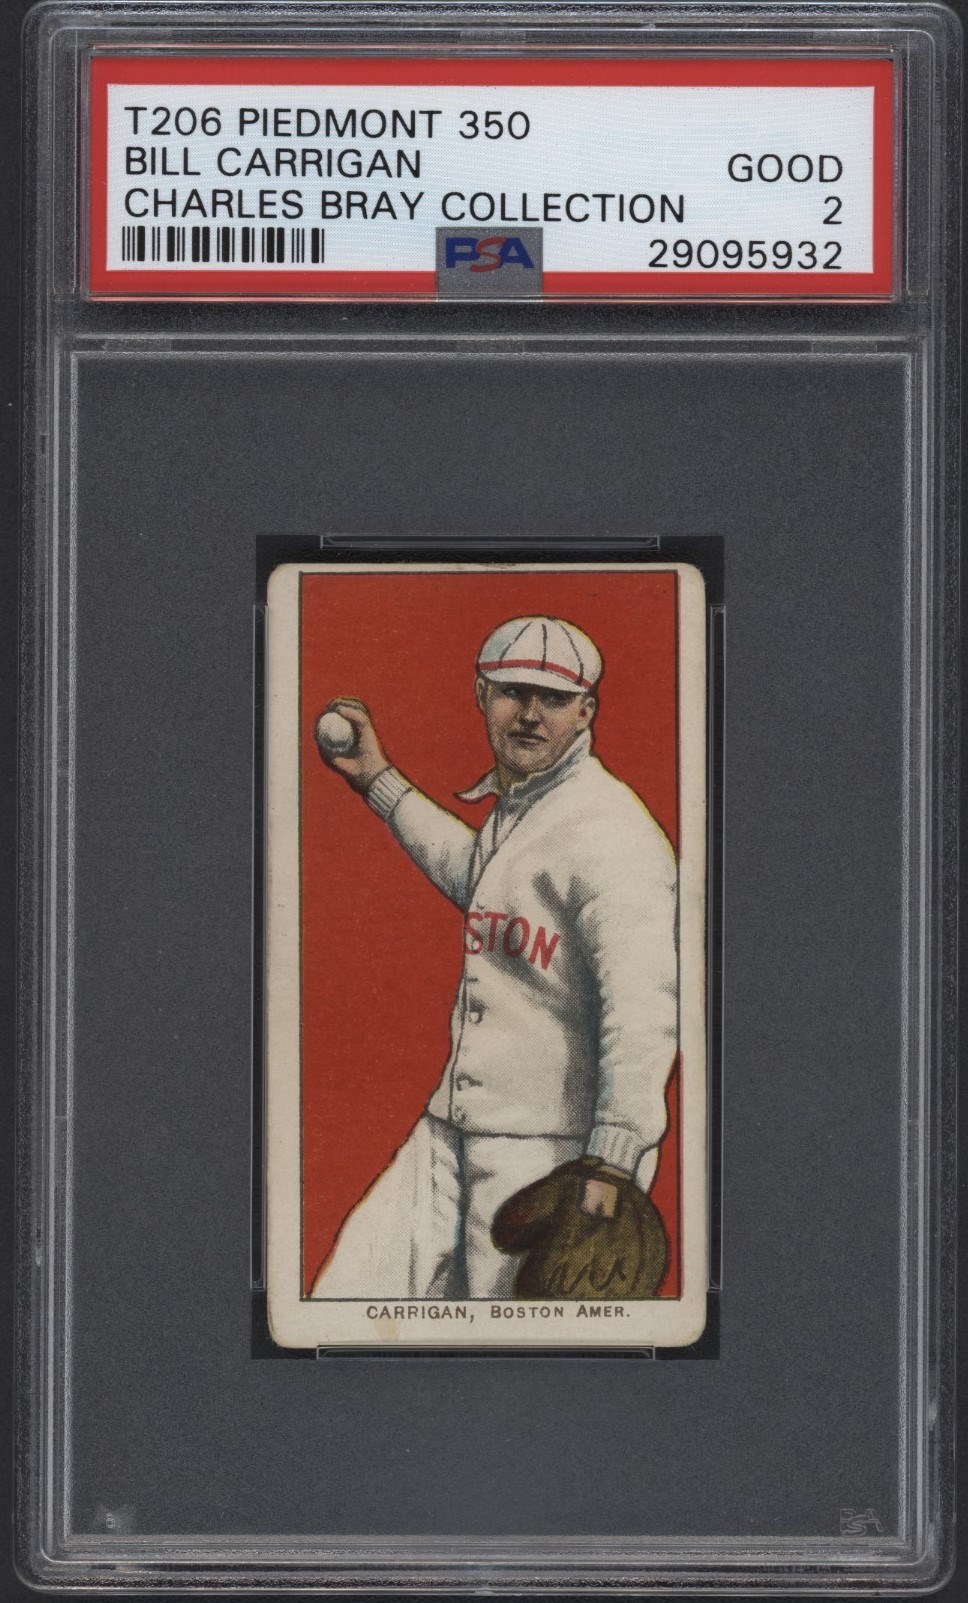 T206 Piedmont 350 Bill Carrigan PSA 2 From the Charles Bray Collection